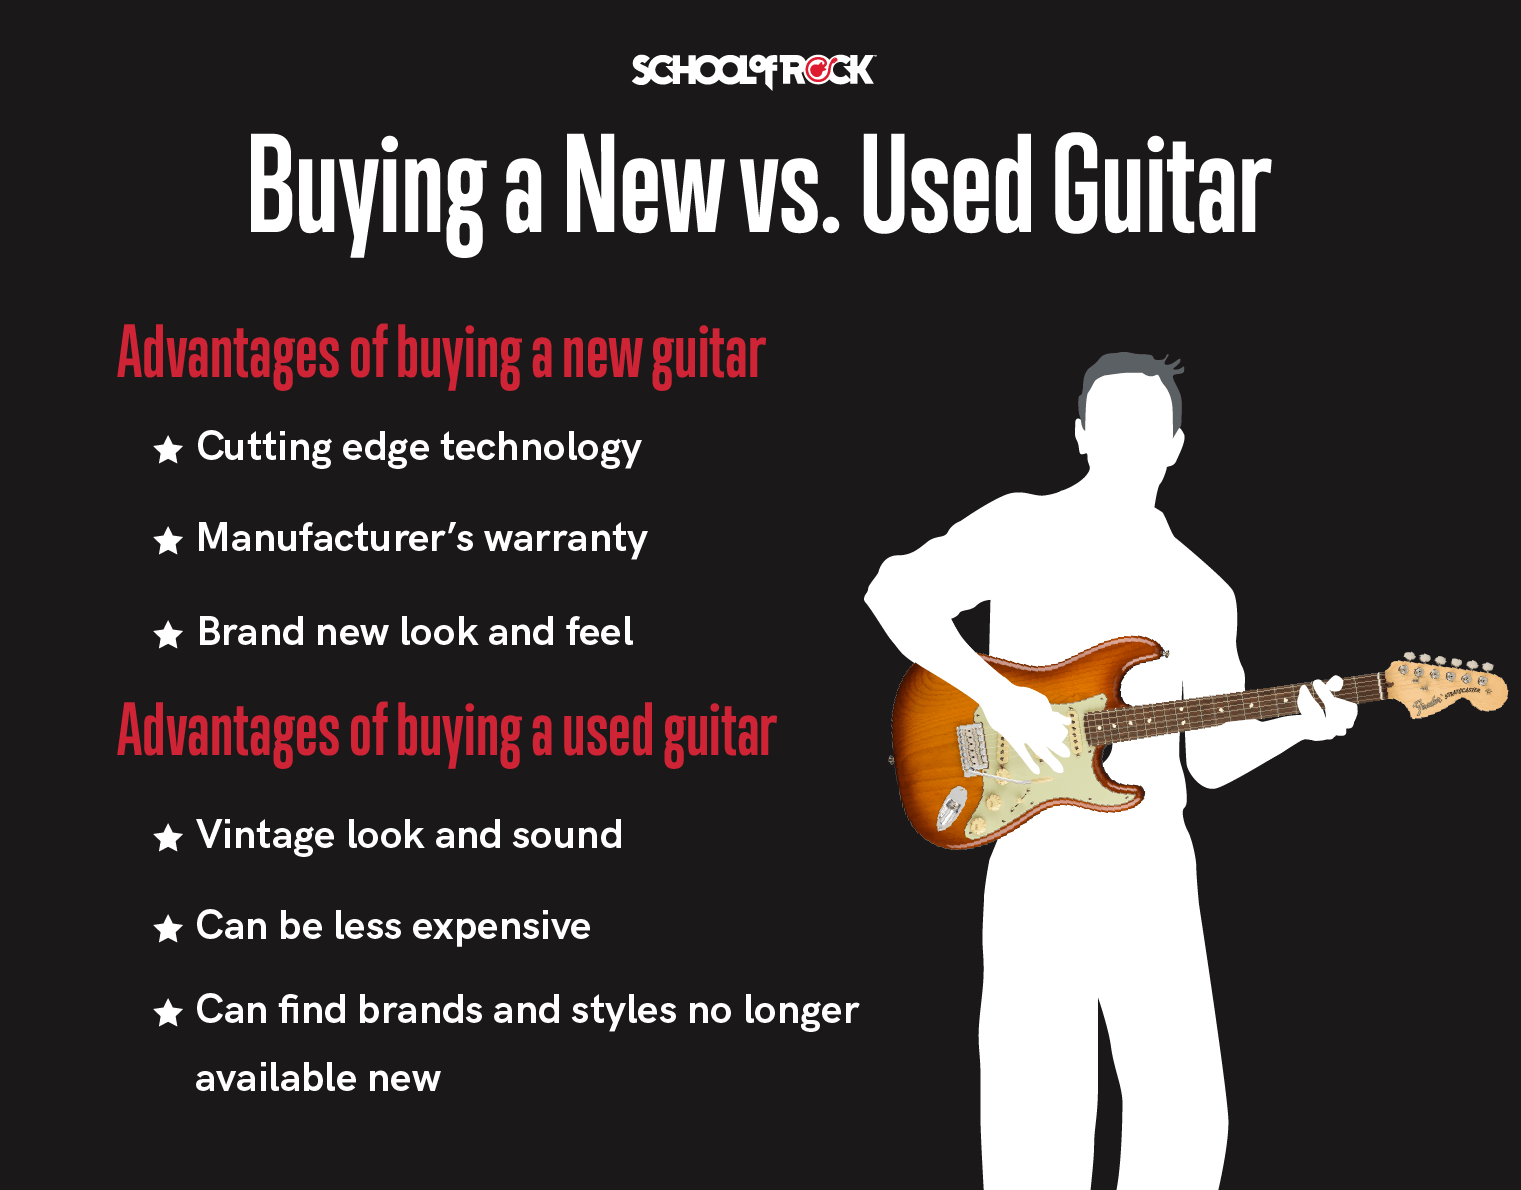 Buying a new vs. a used guitar